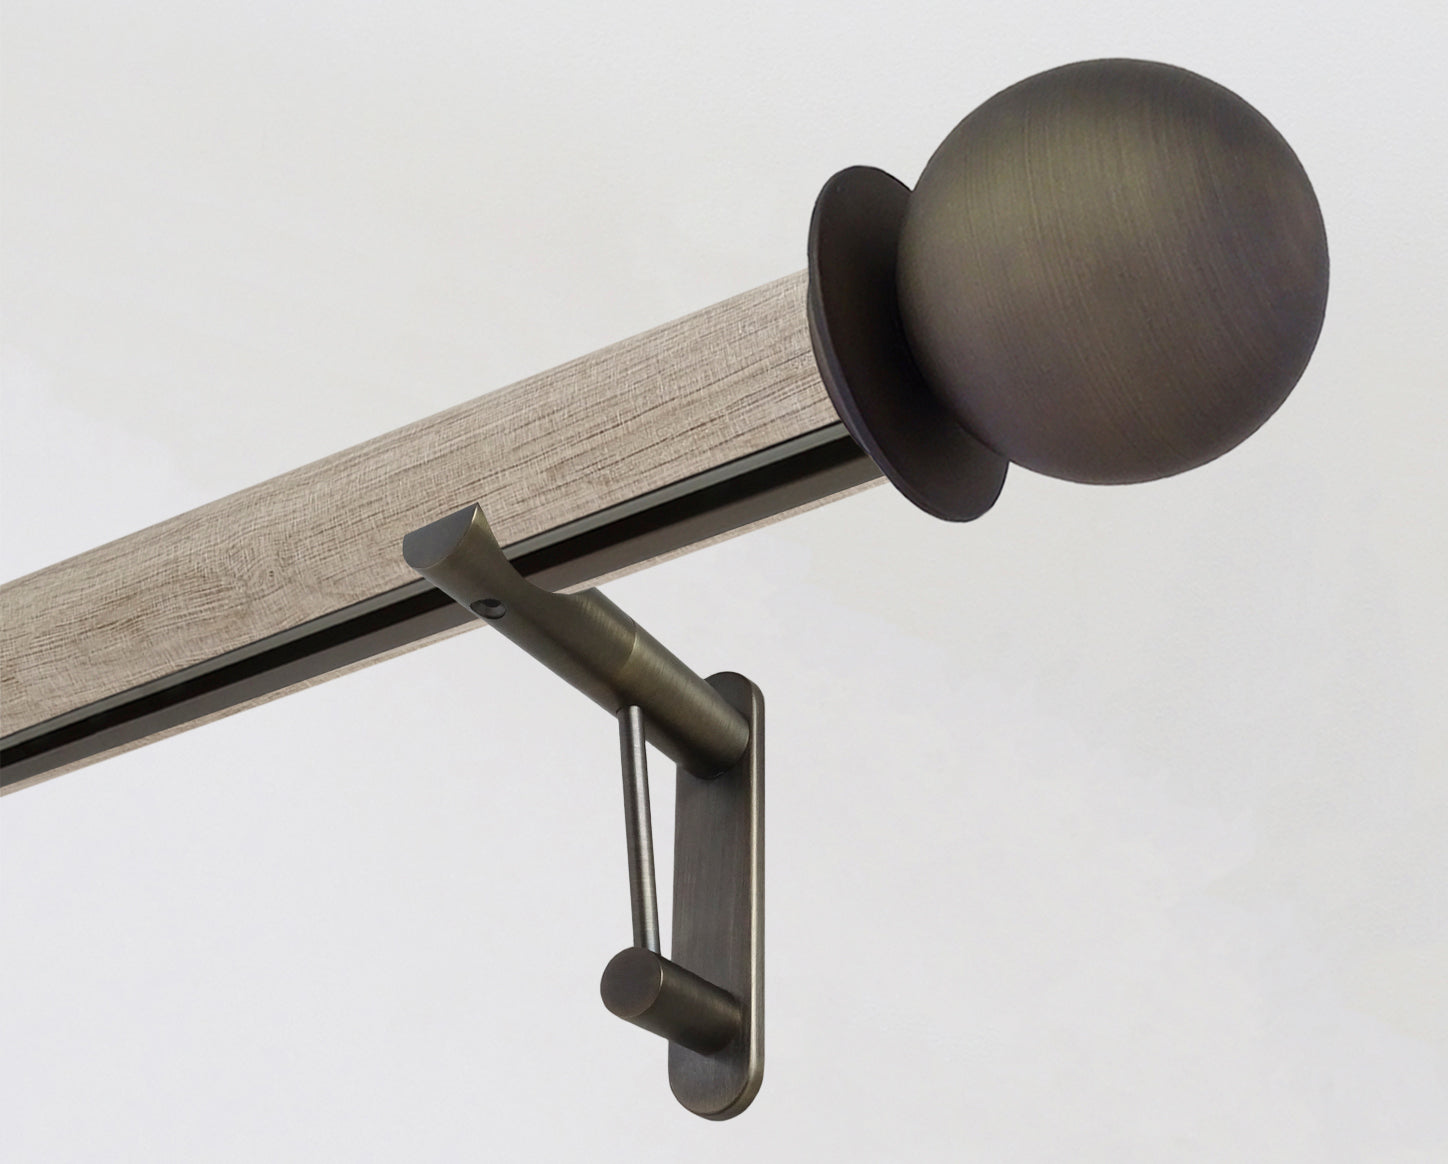 Unfinished real oak curtain pole set with hidden track and metal ball finials | Walcot House